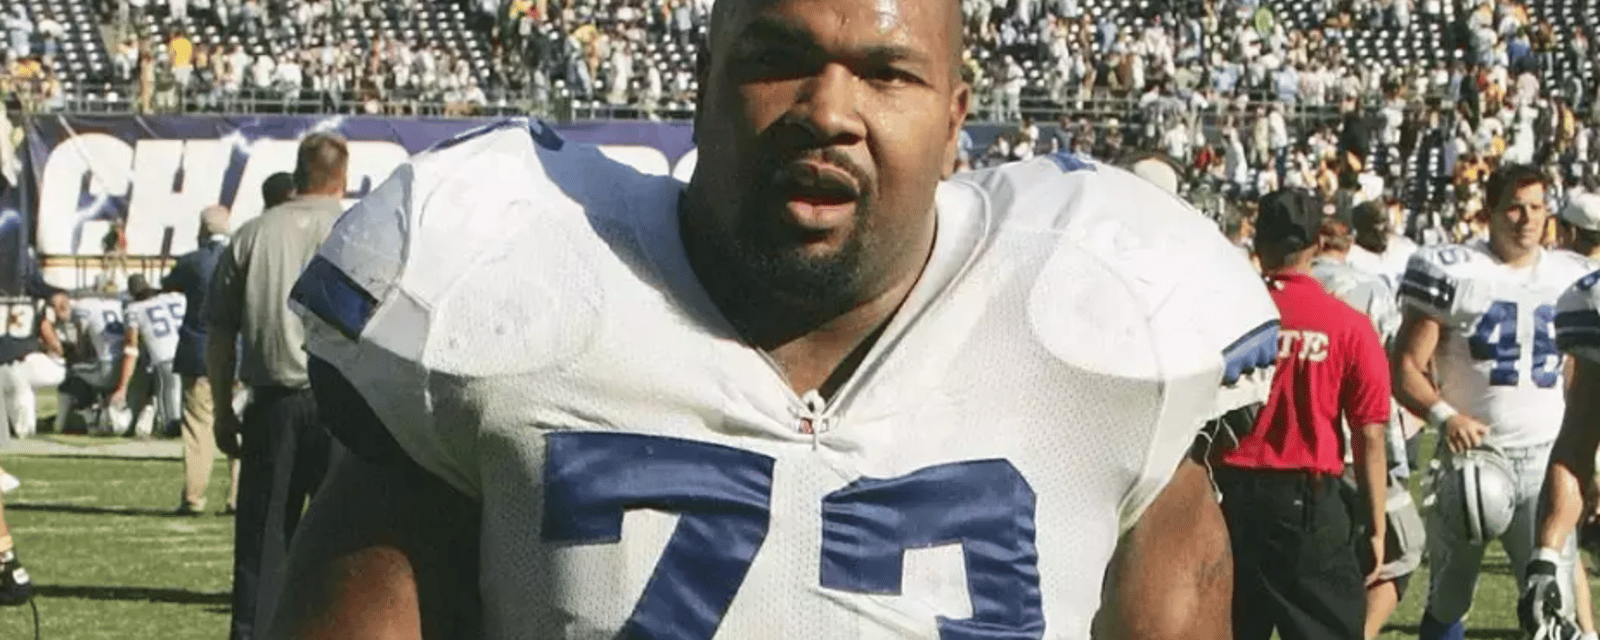 Cowboys Hall of Famer Larry Allen has died suddenly